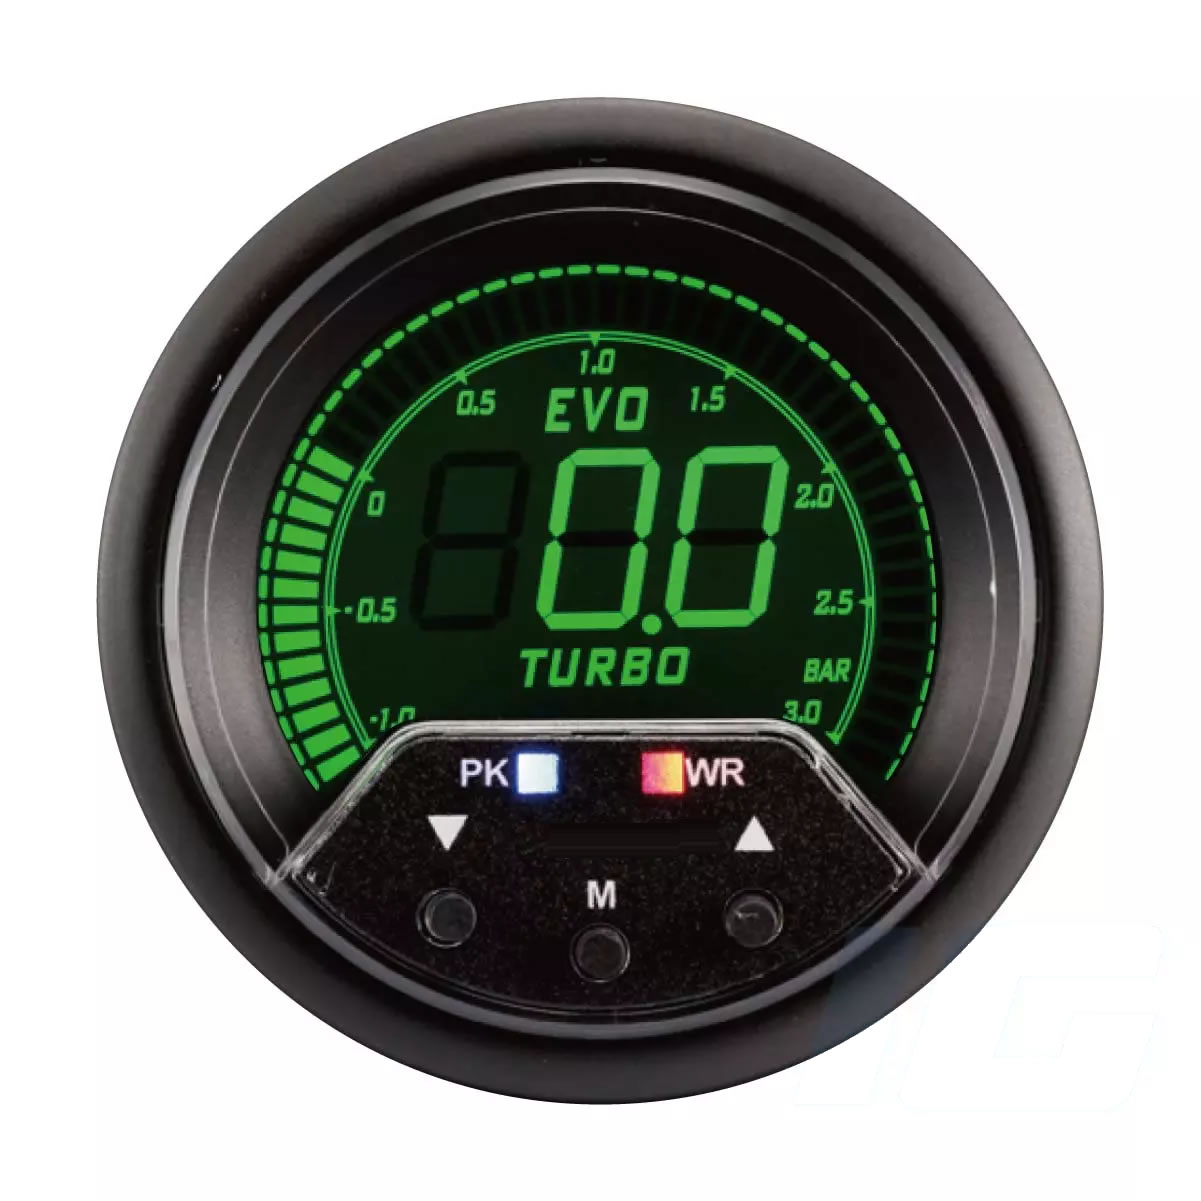 60mm LCD Performance Car Gauges - Boost Gauge With Sensor and Warning and Peak For Your Sport Racing Car